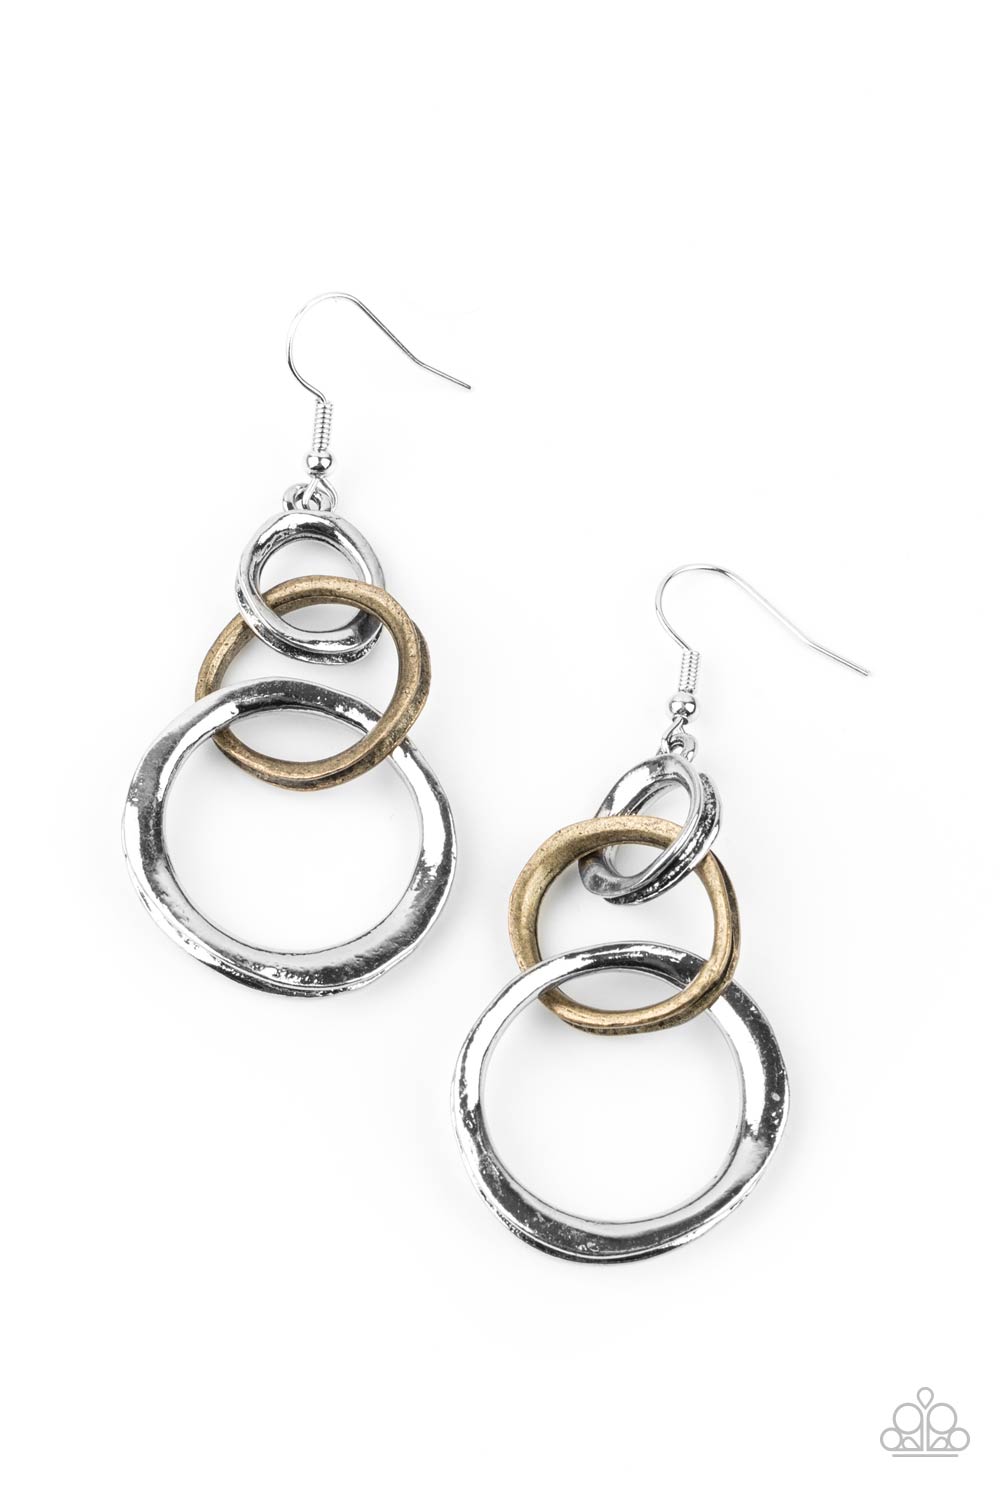 Harmoniously Handcrafted - Silver & Brass Earrings - Princess Glam Shop